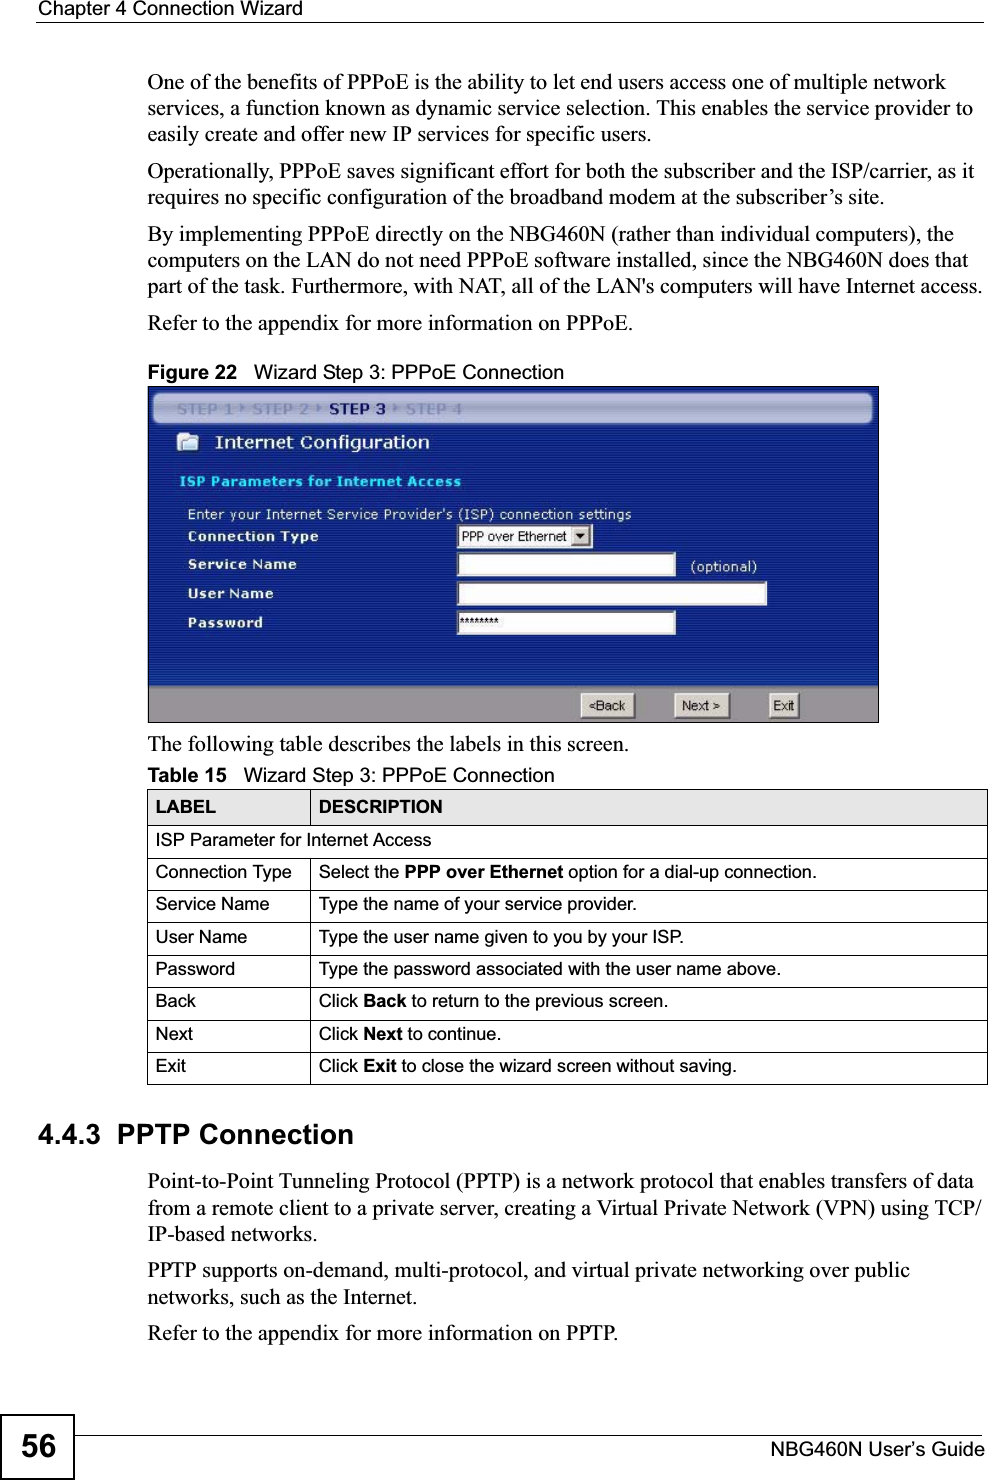 Chapter 4 Connection WizardNBG460N User’s Guide56One of the benefits of PPPoE is the ability to let end users access one of multiple network services, a function known as dynamic service selection. This enables the service provider to easily create and offer new IP services for specific users.Operationally, PPPoE saves significant effort for both the subscriber and the ISP/carrier, as it requires no specific configuration of the broadband modem at the subscriber’s site.By implementing PPPoE directly on the NBG460N (rather than individual computers), the computers on the LAN do not need PPPoE software installed, since the NBG460N does that part of the task. Furthermore, with NAT, all of the LAN&apos;s computers will have Internet access.Refer to the appendix for more information on PPPoE.Figure 22   Wizard Step 3: PPPoE ConnectionThe following table describes the labels in this screen.4.4.3  PPTP ConnectionPoint-to-Point Tunneling Protocol (PPTP) is a network protocol that enables transfers of data from a remote client to a private server, creating a Virtual Private Network (VPN) using TCP/IP-based networks.PPTP supports on-demand, multi-protocol, and virtual private networking over public networks, such as the Internet.Refer to the appendix for more information on PPTP.Table 15   Wizard Step 3: PPPoE ConnectionLABEL DESCRIPTIONISP Parameter for Internet AccessConnection Type Select the PPP over Ethernet option for a dial-up connection.Service Name  Type the name of your service provider.User Name Type the user name given to you by your ISP. Password  Type the password associated with the user name above.Back Click Back to return to the previous screen. Next Click Next to continue. Exit Click Exit to close the wizard screen without saving.